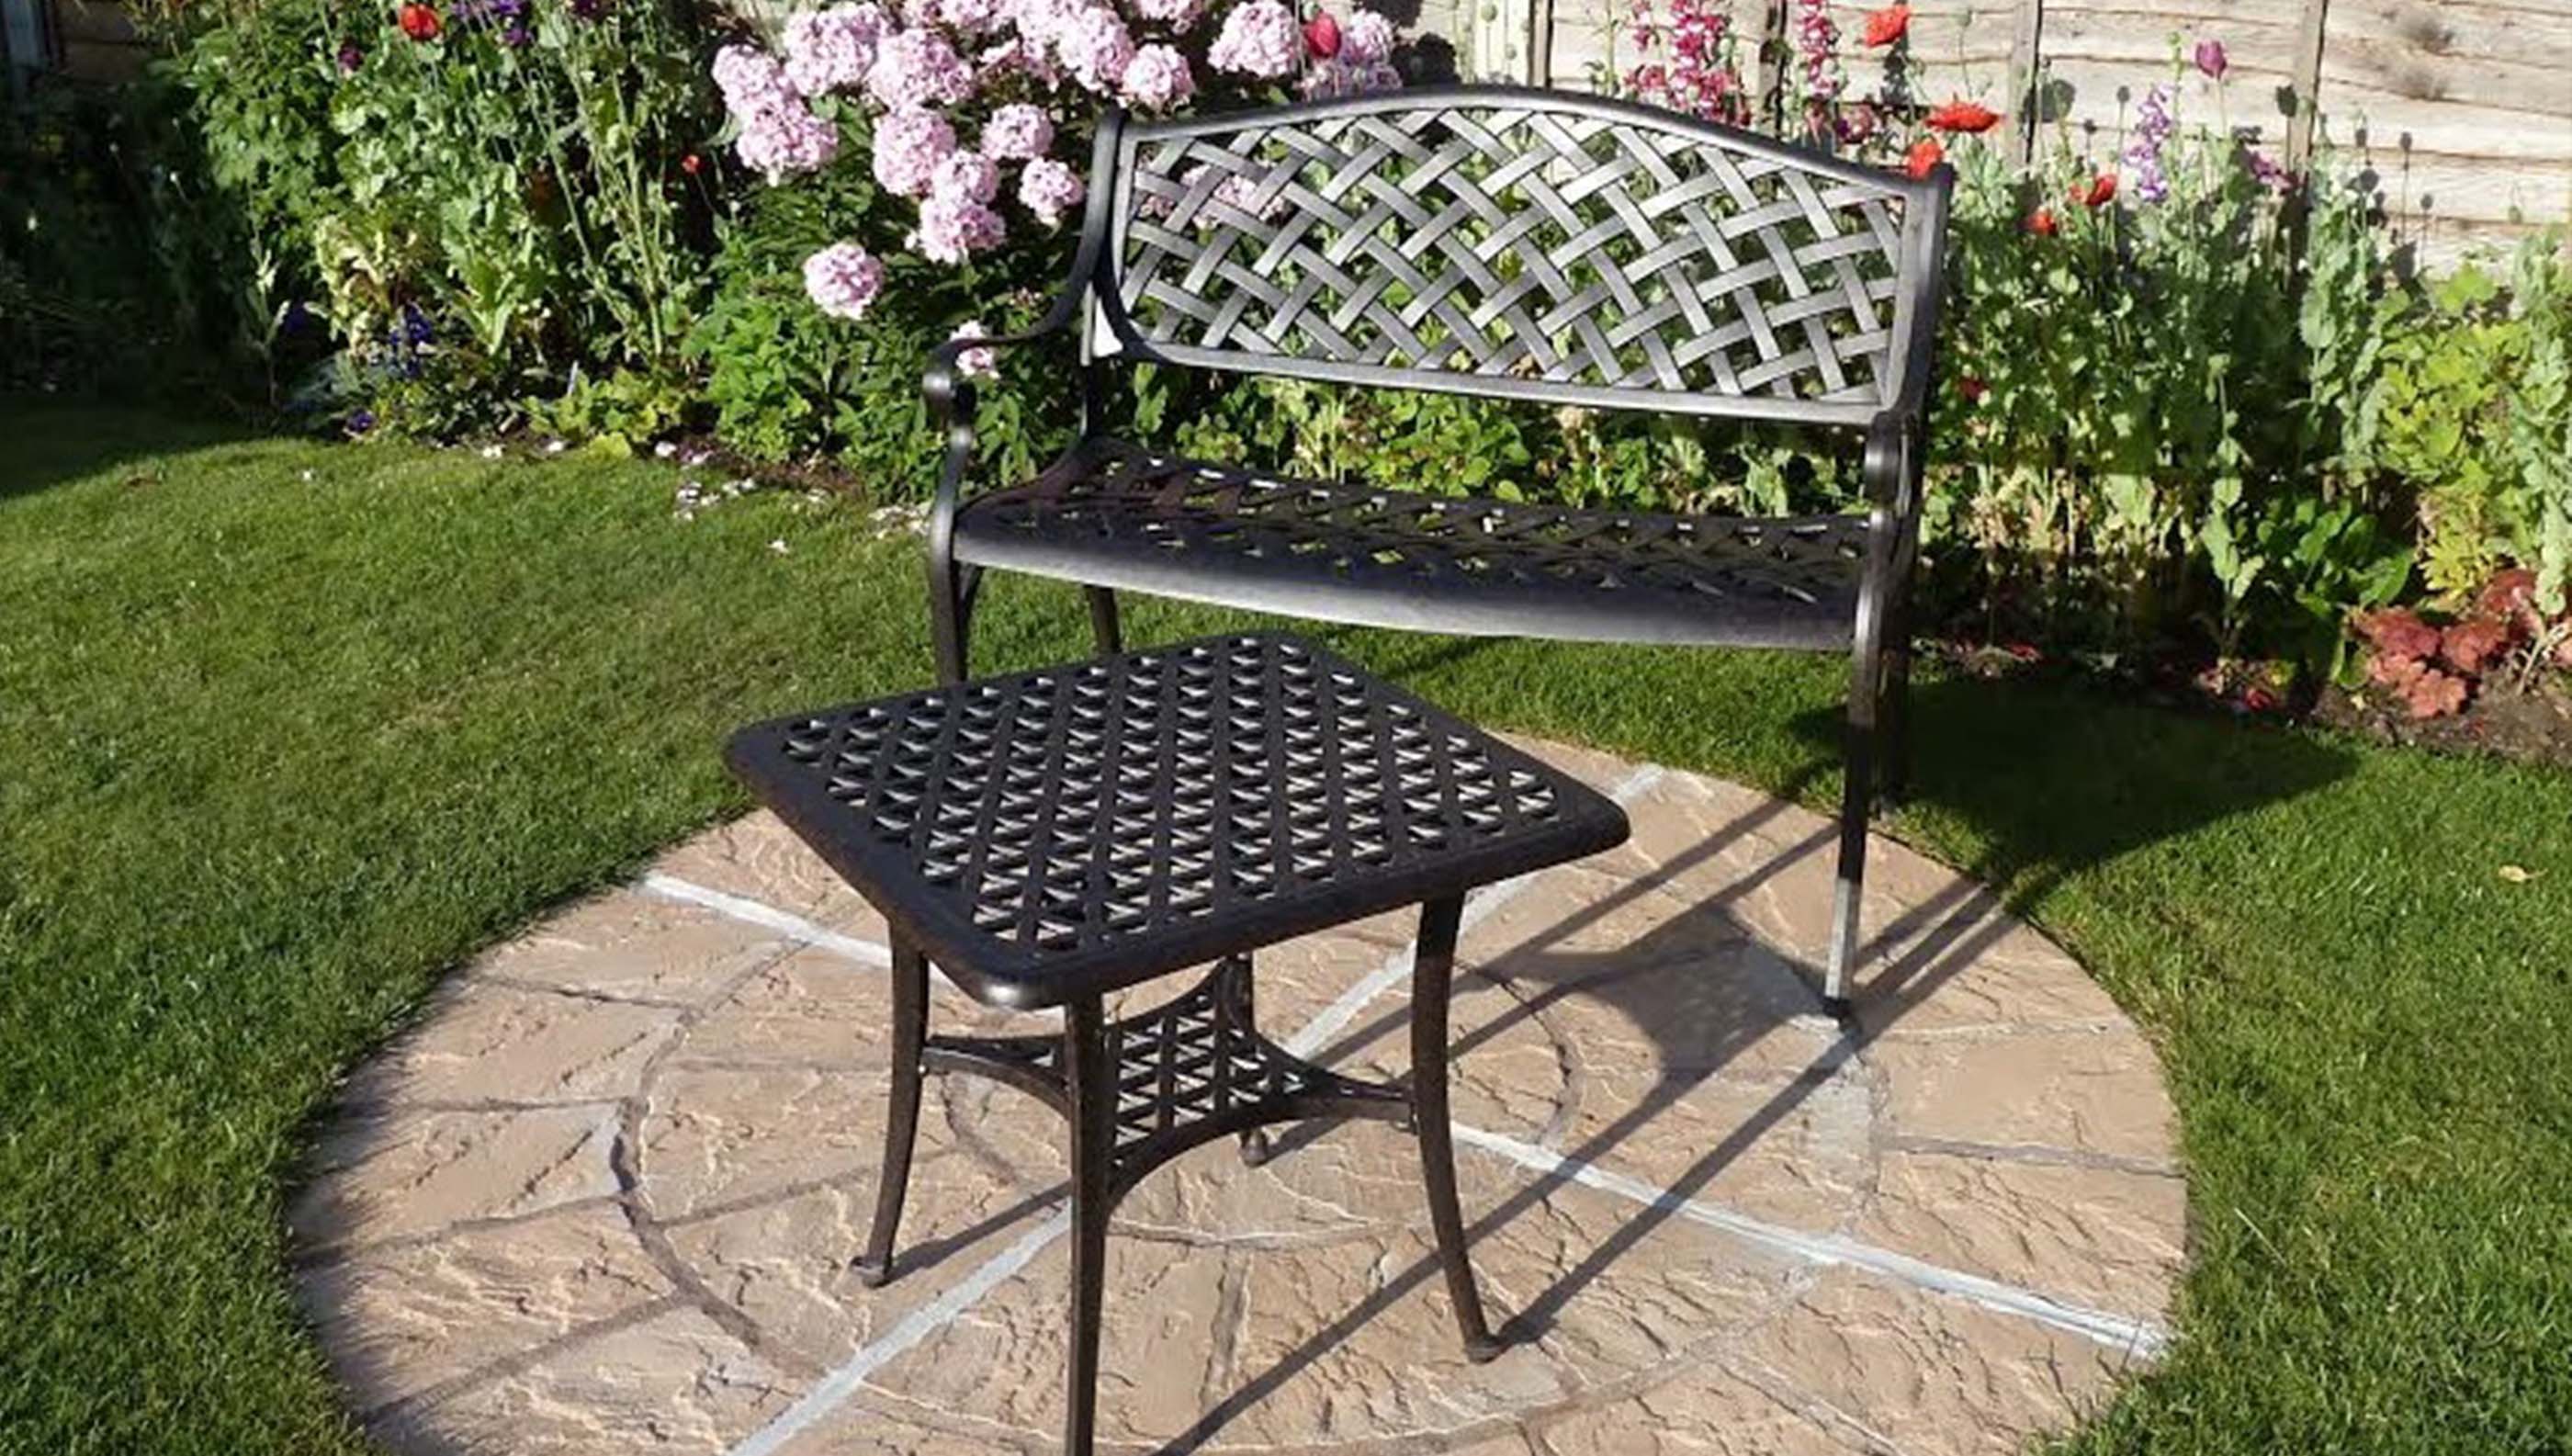 How To Oil Garden Furniture Lazy Susan, What Is The Best Oil To Use On Outdoor Furniture